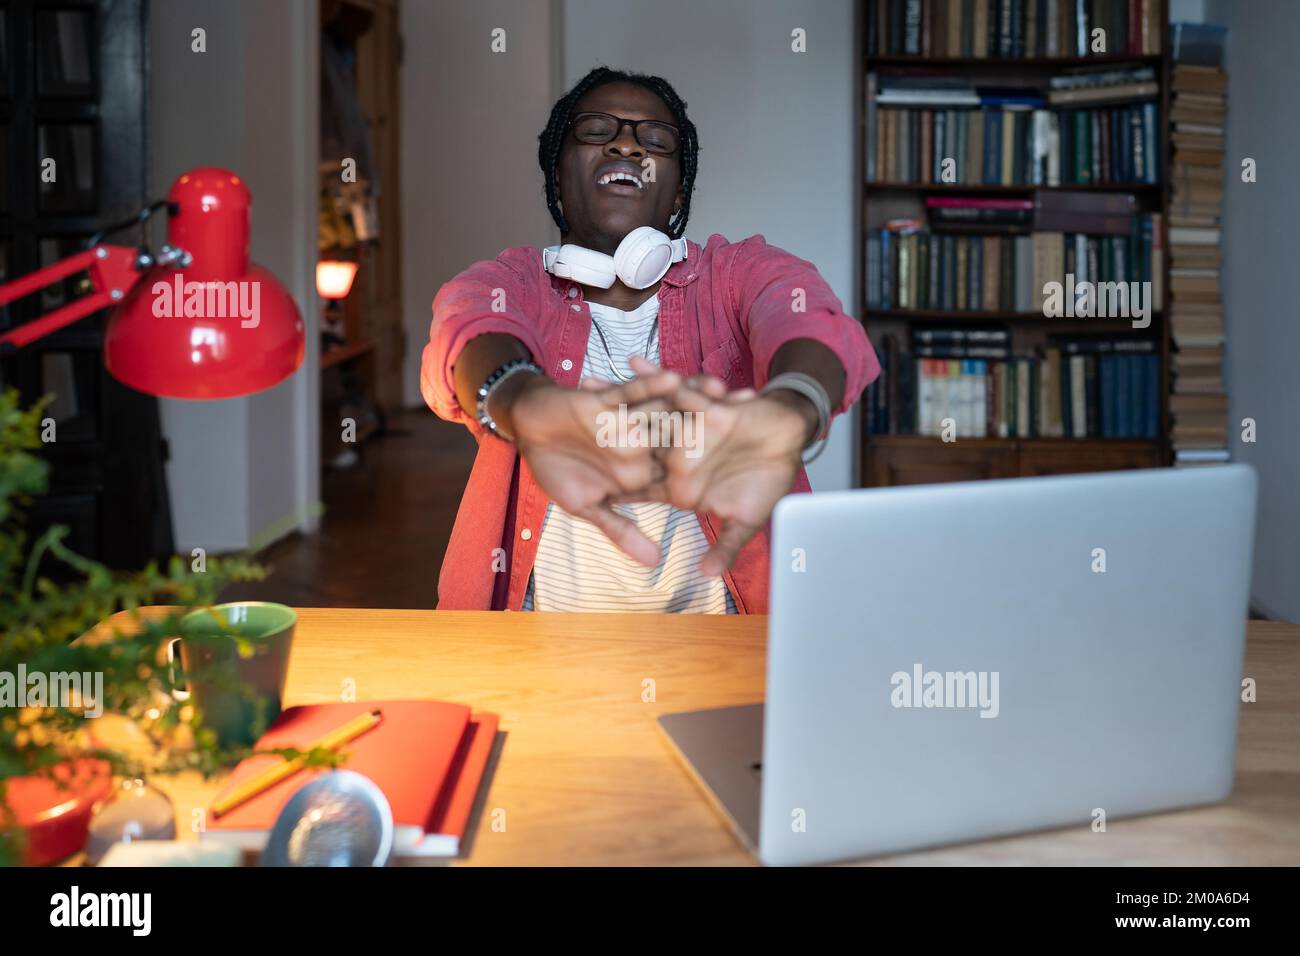 Sleepy African student guy yawning stretching arms while studying on laptop for long hours at home Stock Photo